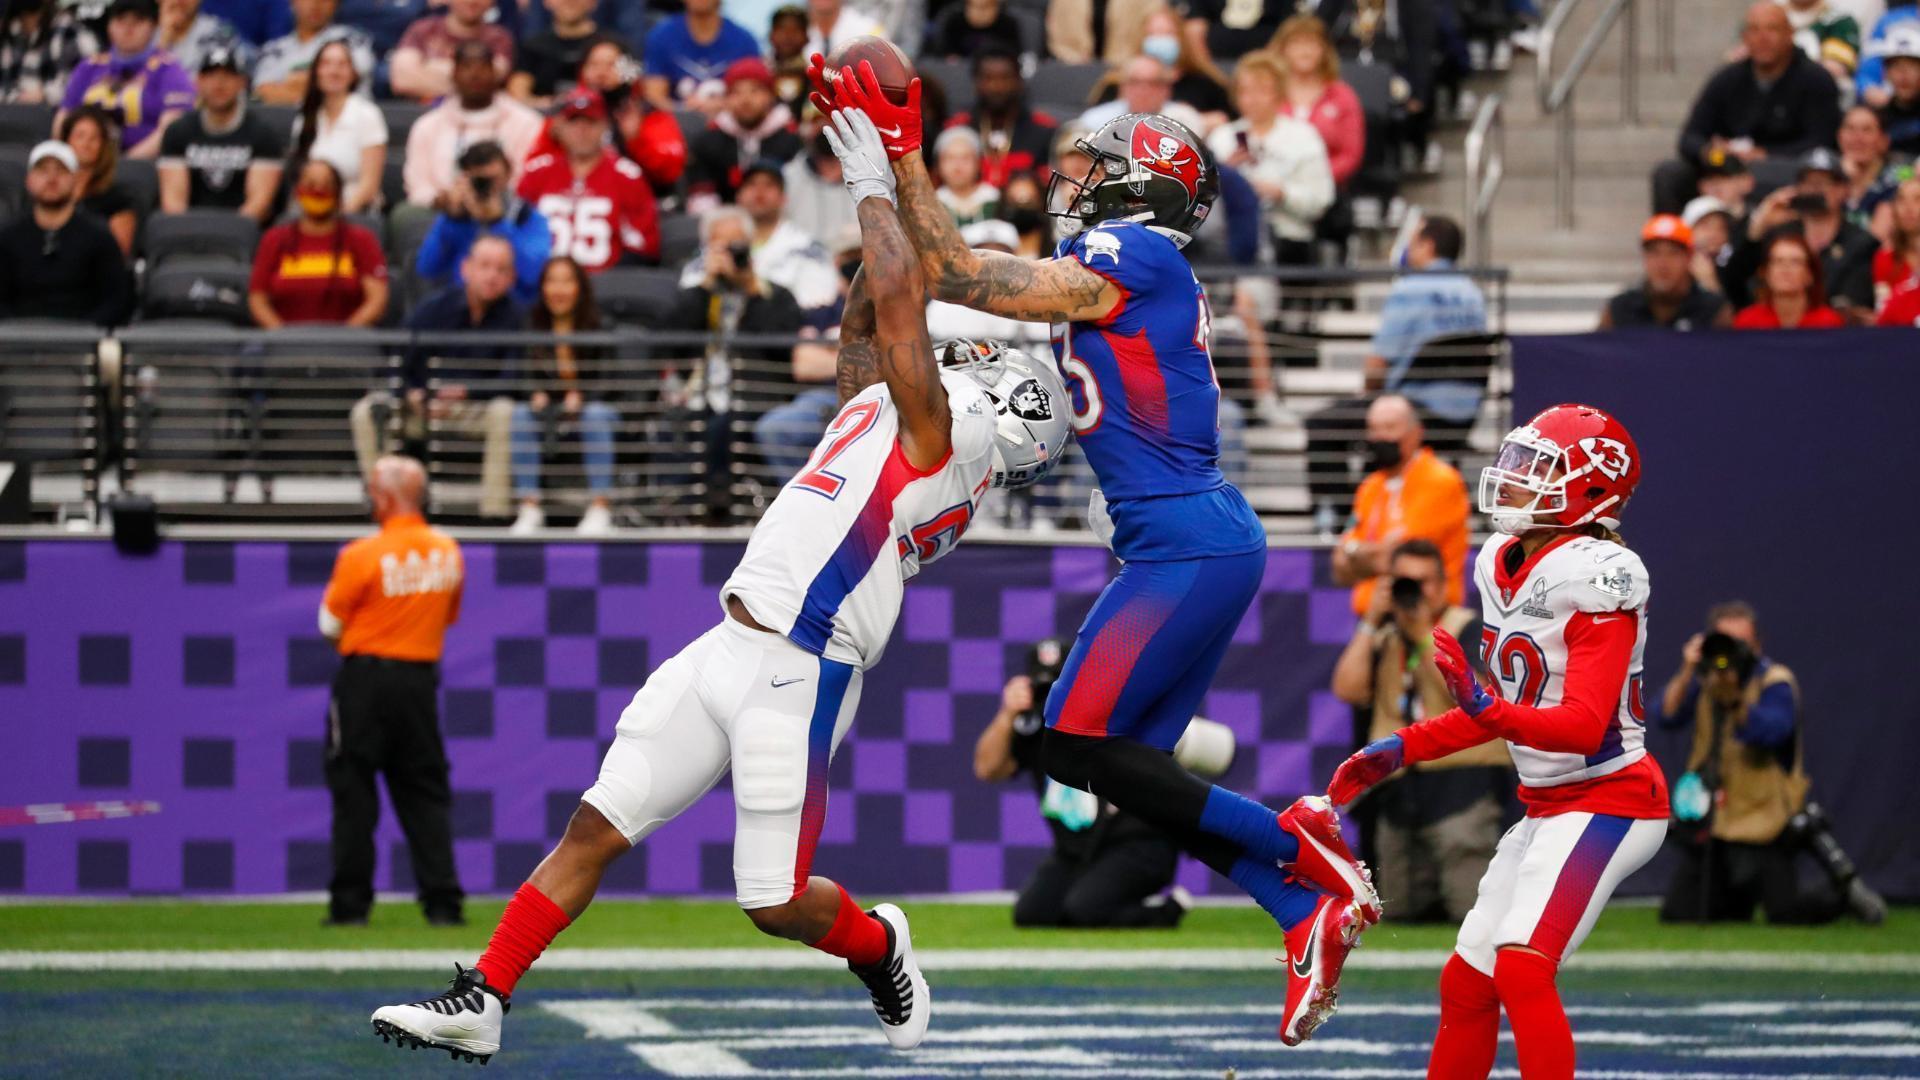 NFL Pro Bowl 2022 - Not much tackling, but plenty of fun as AFC